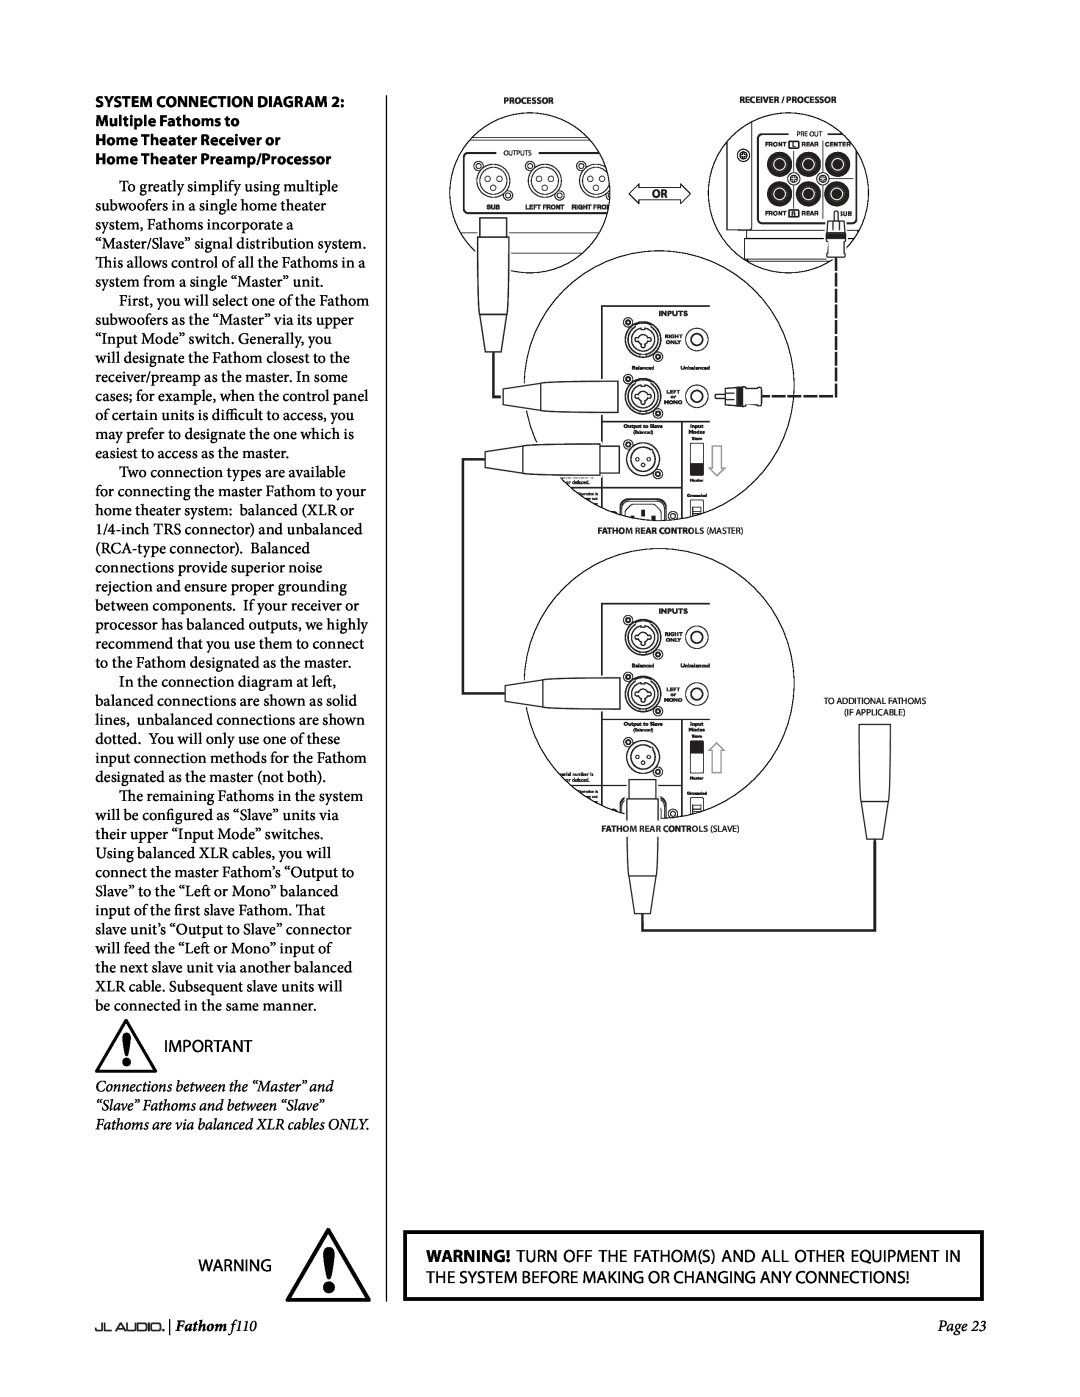 JL Audio f110 SYSTEM CONNECTION DIAGRAM 2 Multiple Fathoms to, Home Theater Receiver or, Home Theater Preamp/Processor 